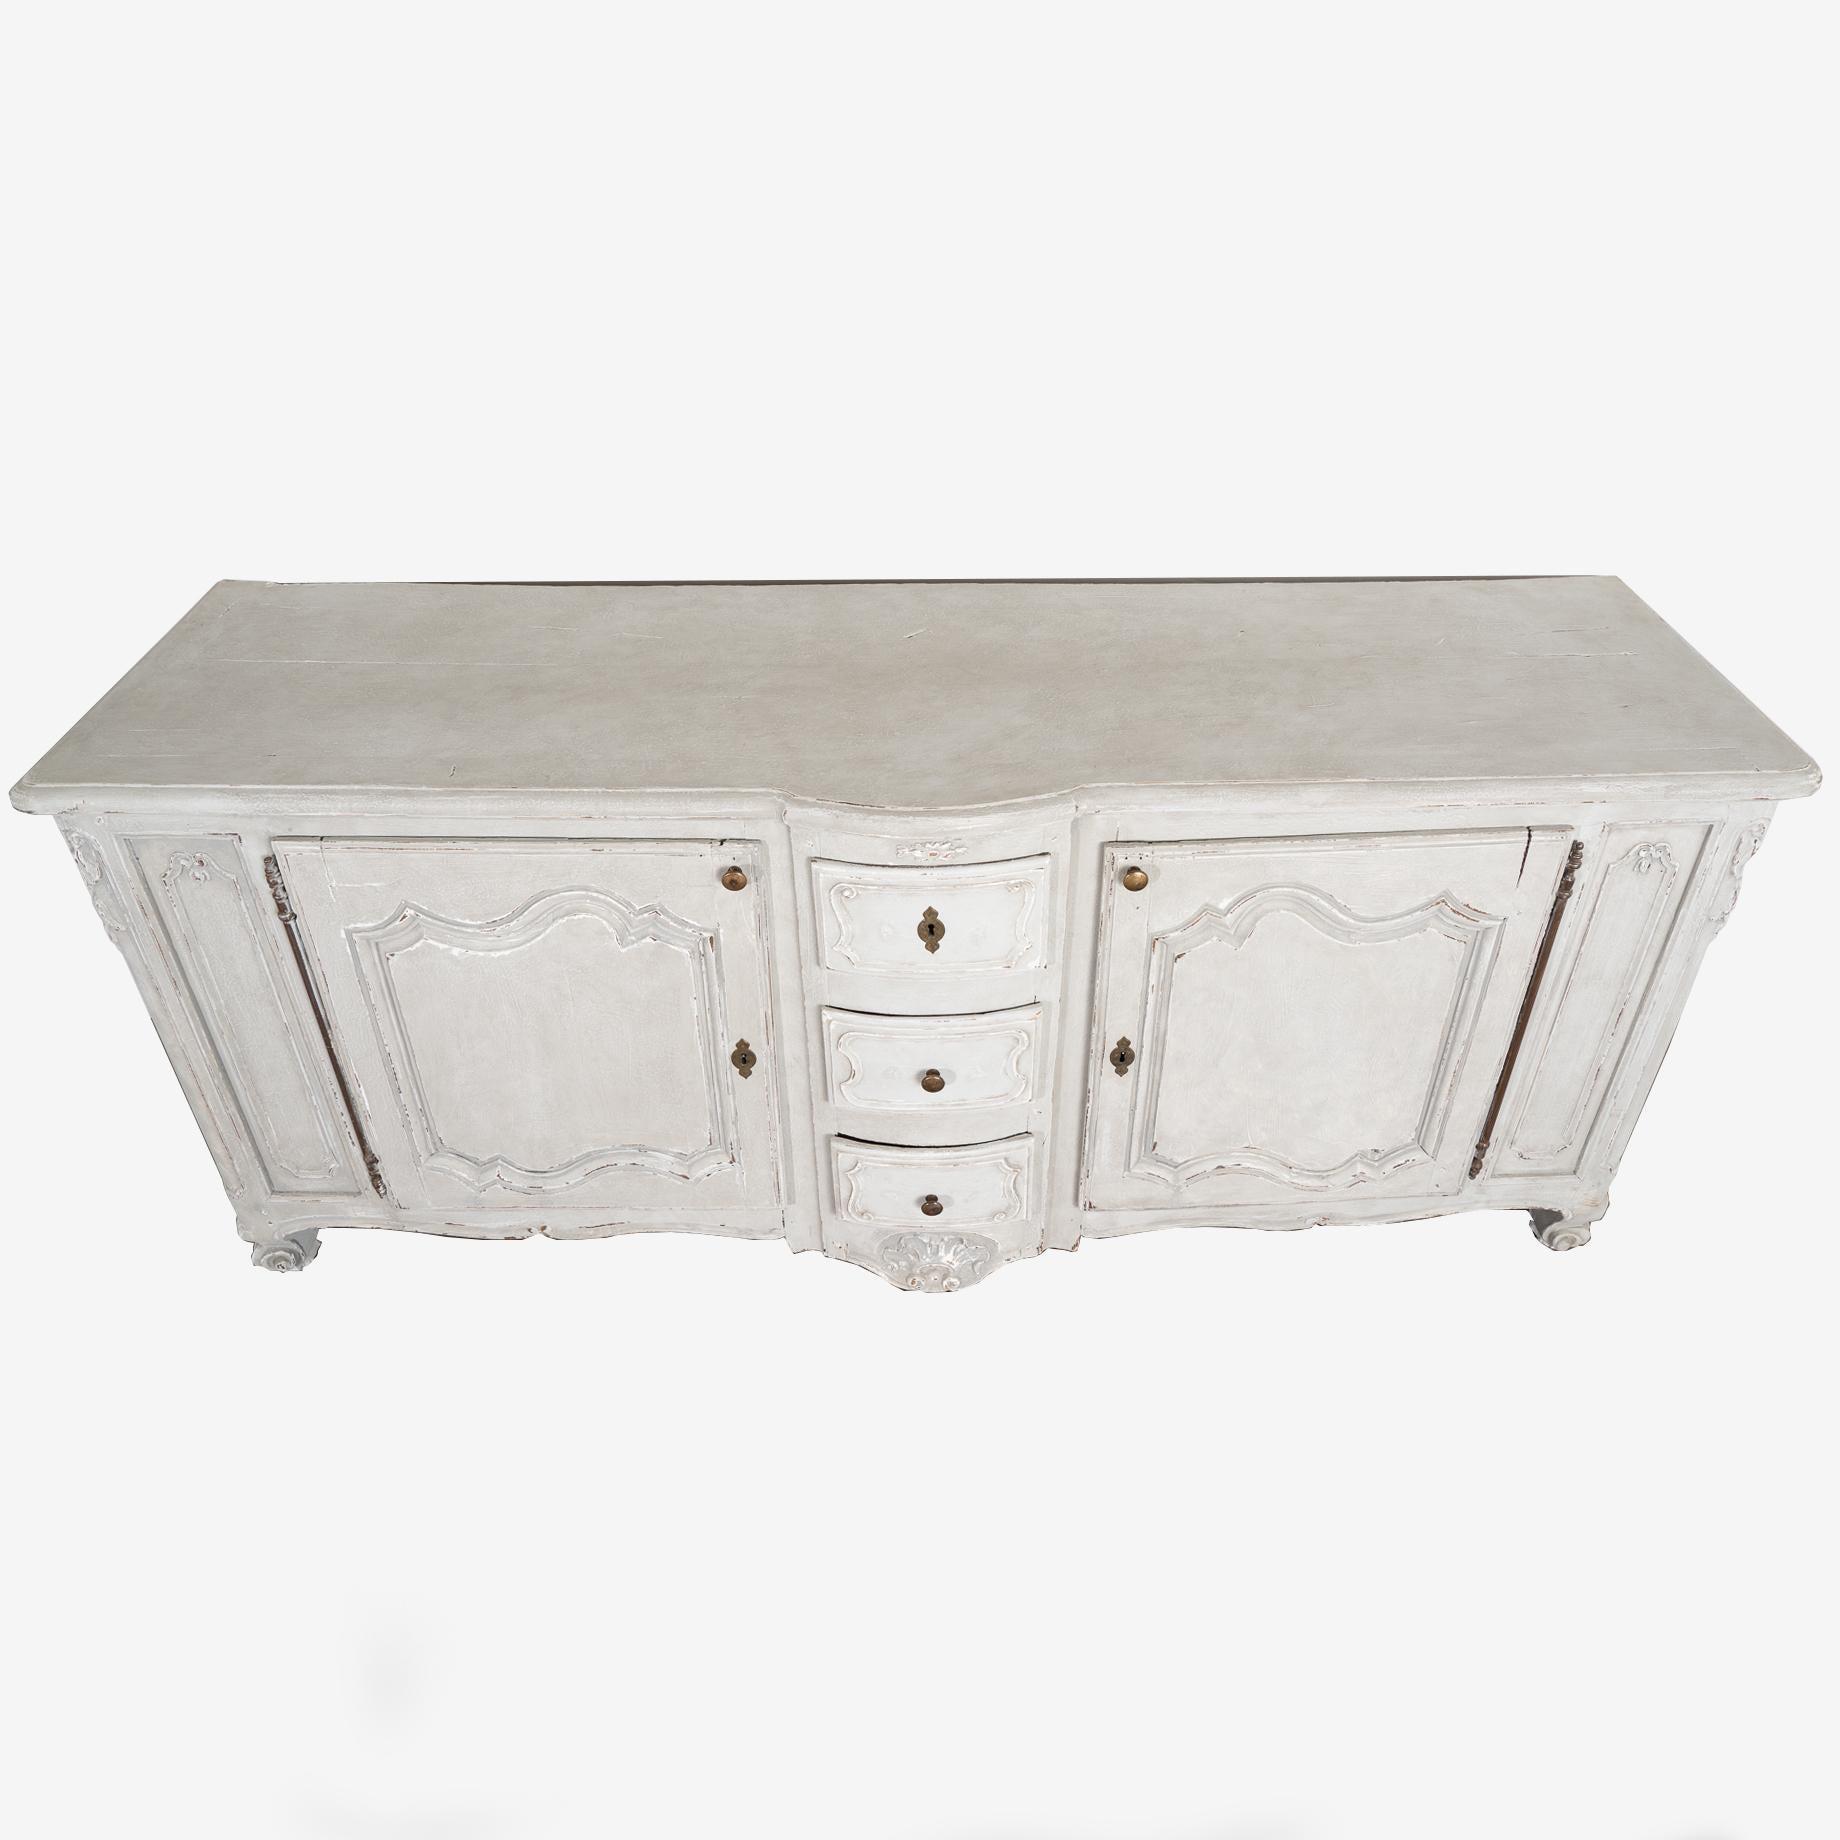 French Provincial Antique Gray Painted French Oak Sideboard Buffet circa 1800s For Sale